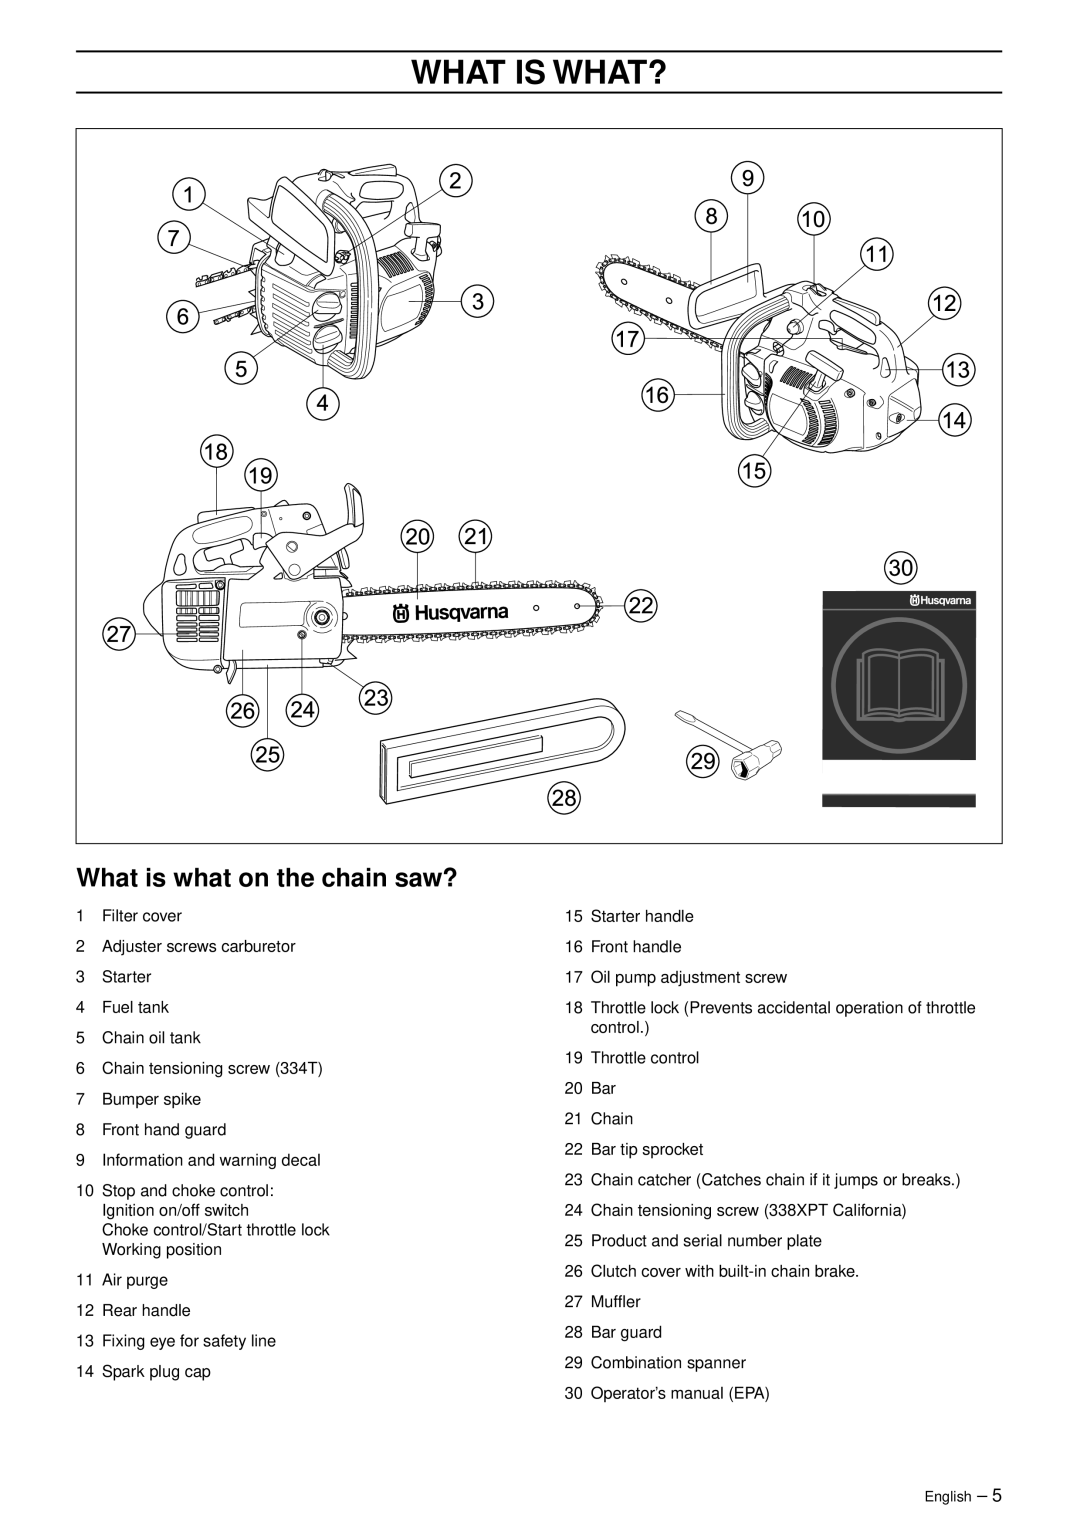 Husqvarna 1151439-95, 338 XPT California manual What Is What?, What is what on the chain saw? 